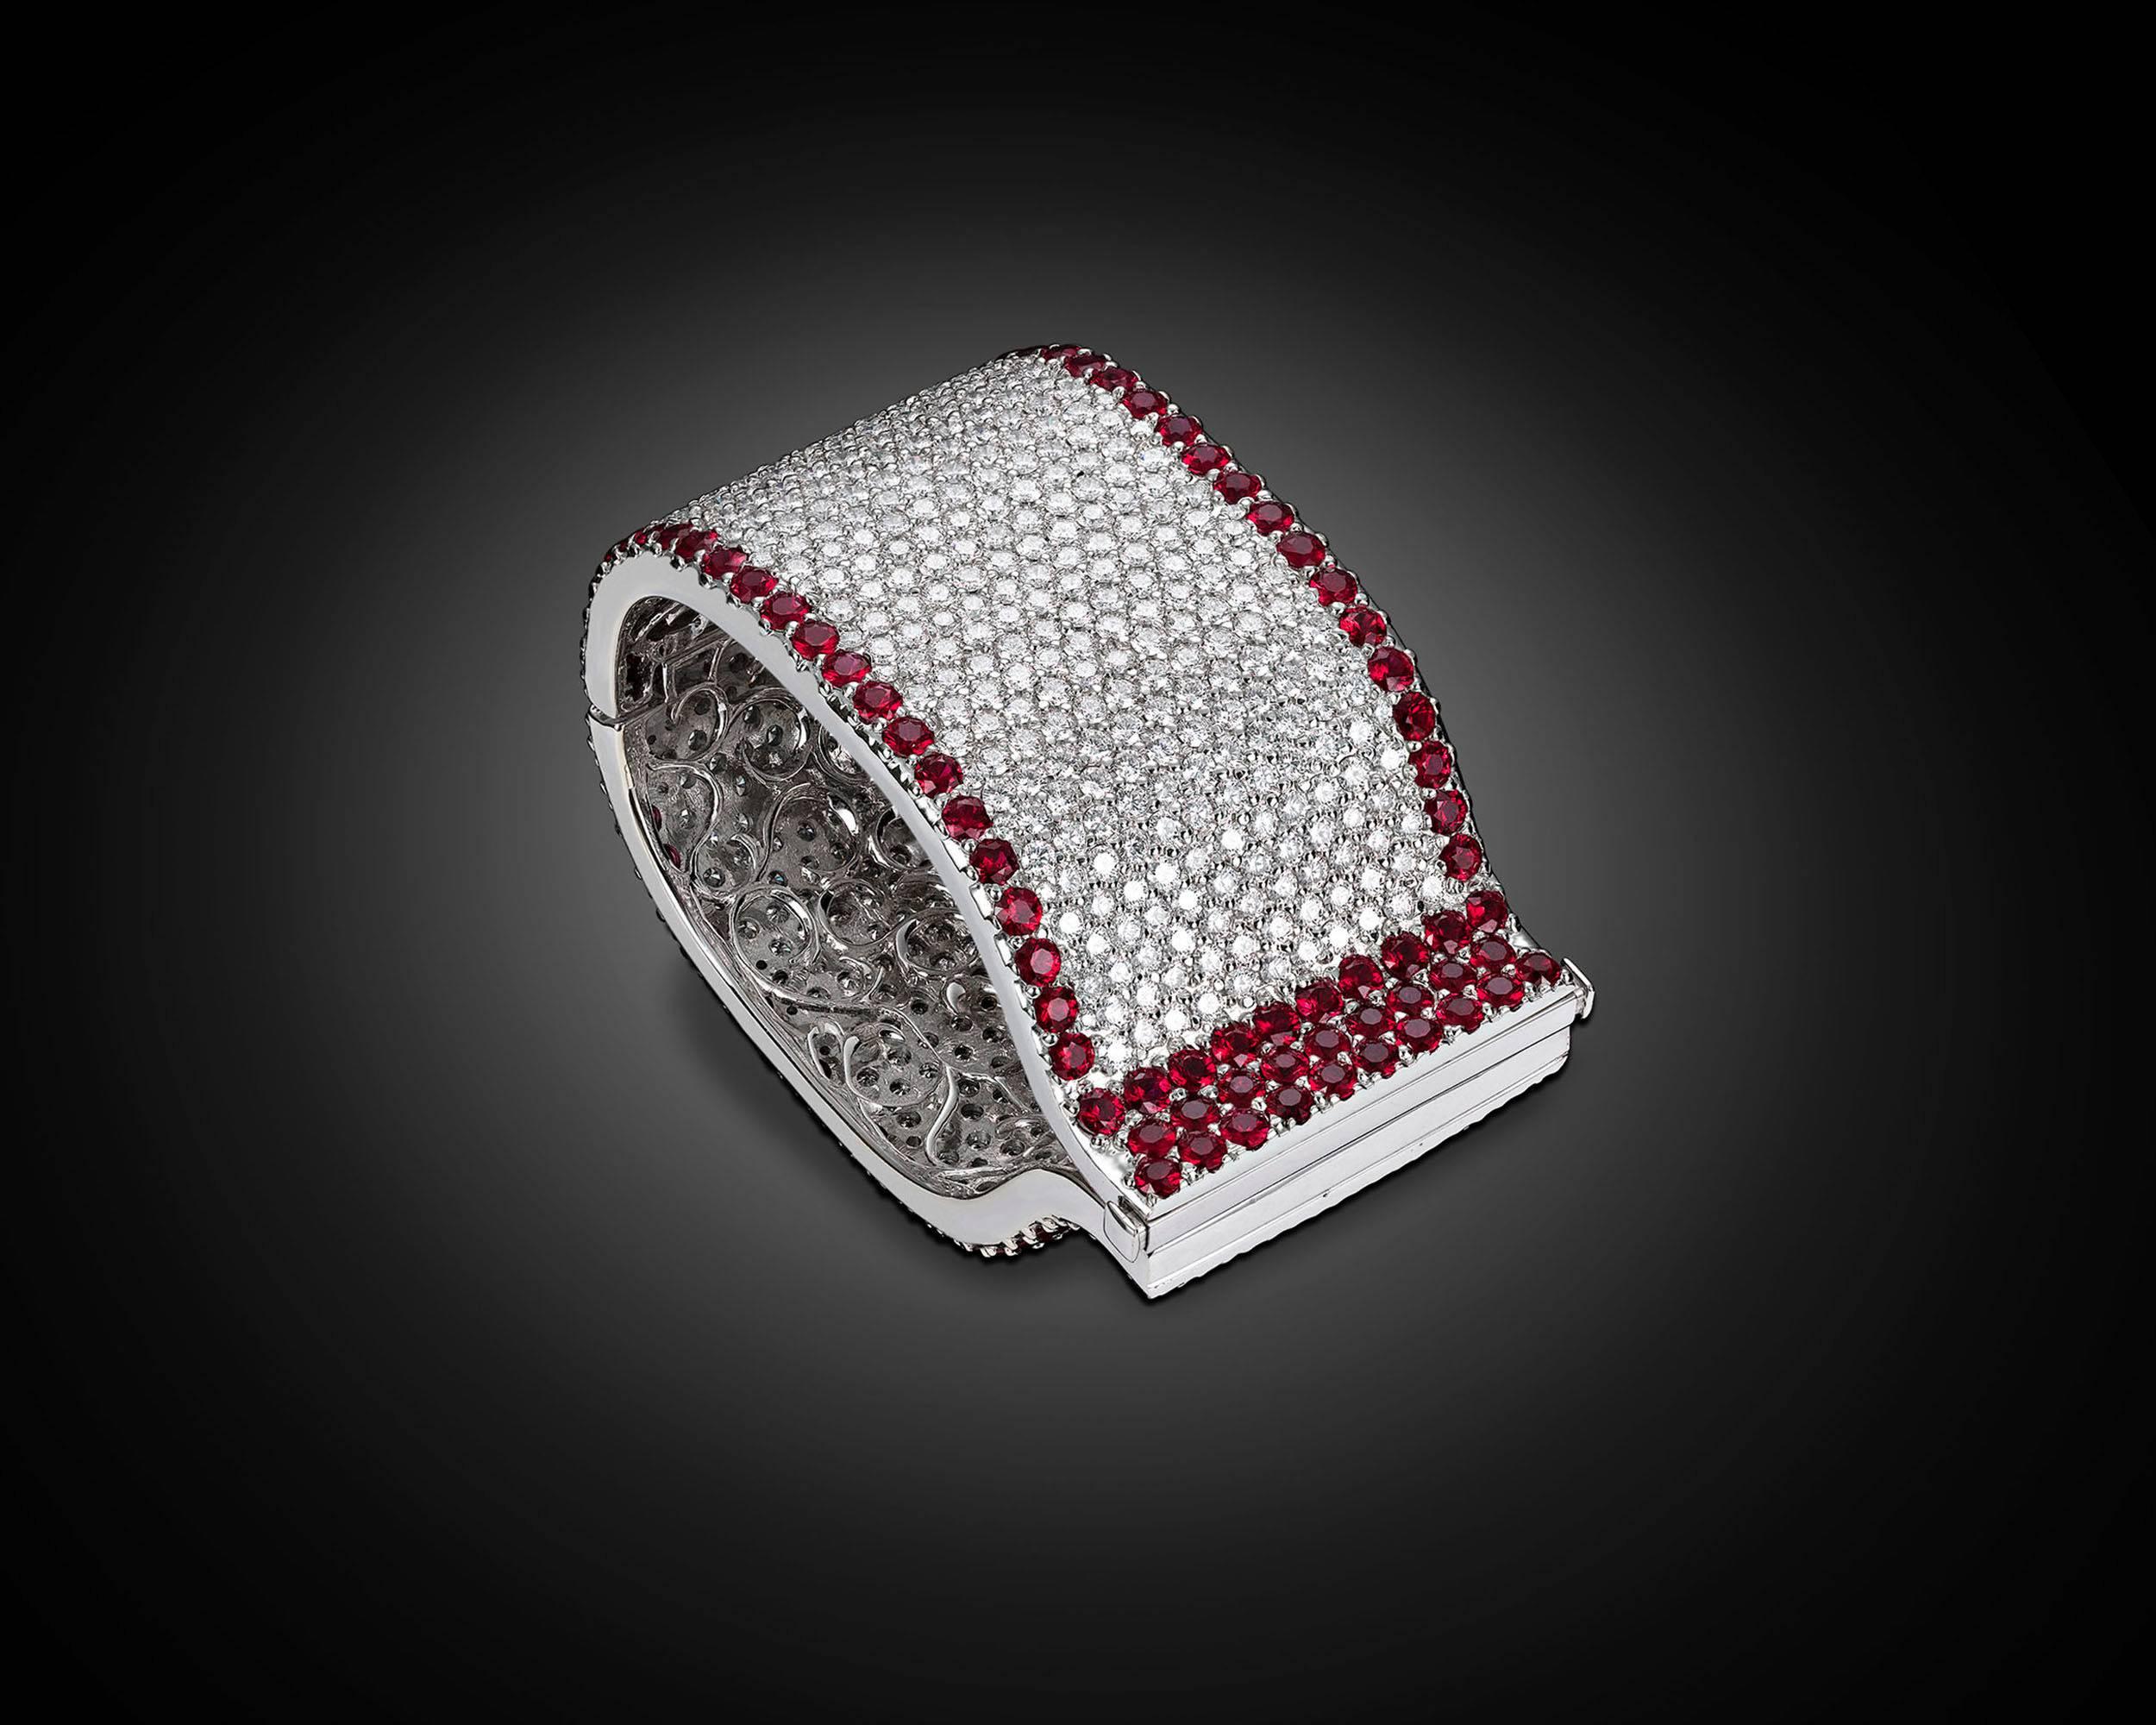 This stunning diamond and ruby cuff bracelet makes a bold statement. Laden with approximately 59.00 total carats of beautifully matched white diamonds, the extraordinary cuff is bordered by approximately 40.00 total carats of luxurious Burma rubies.